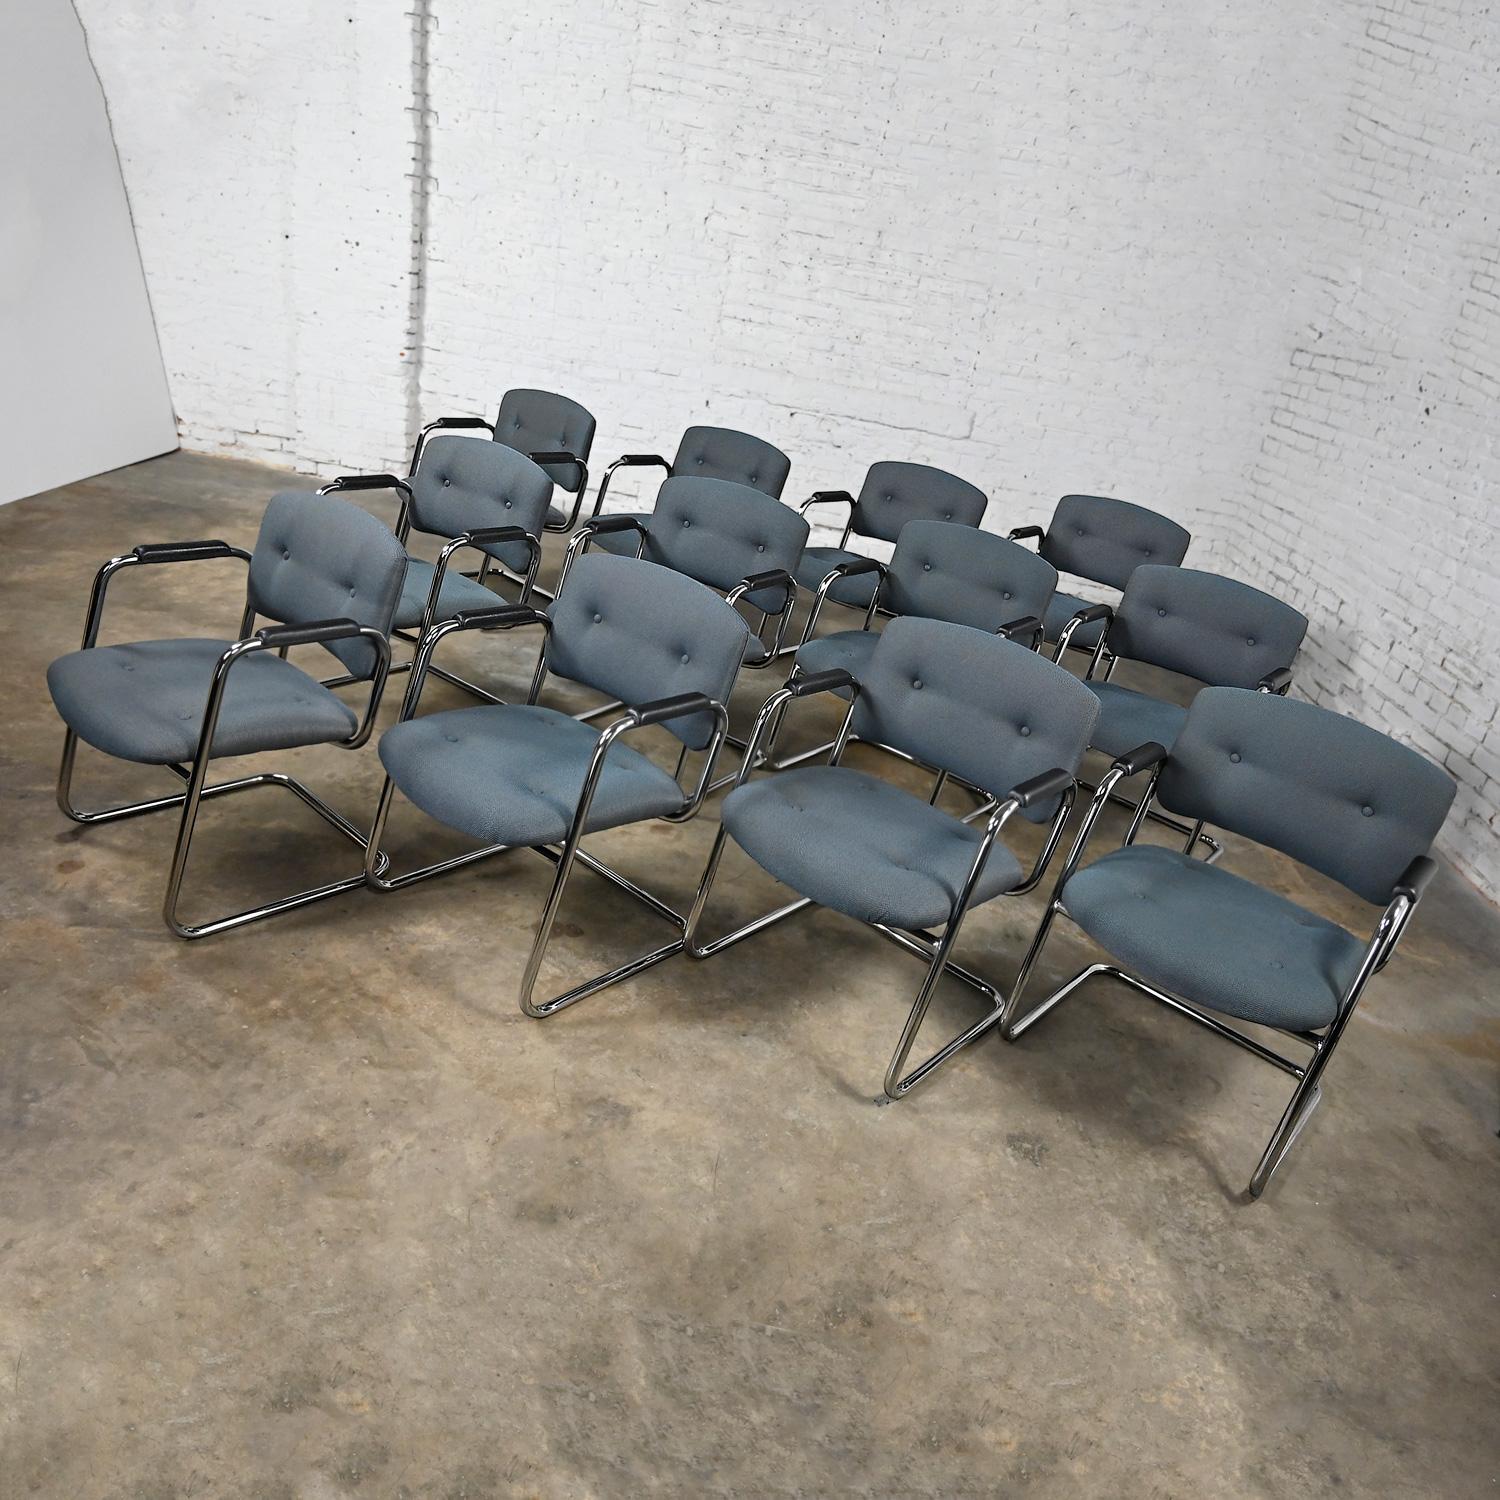 Late 20th Century Gray & Chrome Cantilever Chairs Style Steelcase Set of 12 In Good Condition For Sale In Topeka, KS